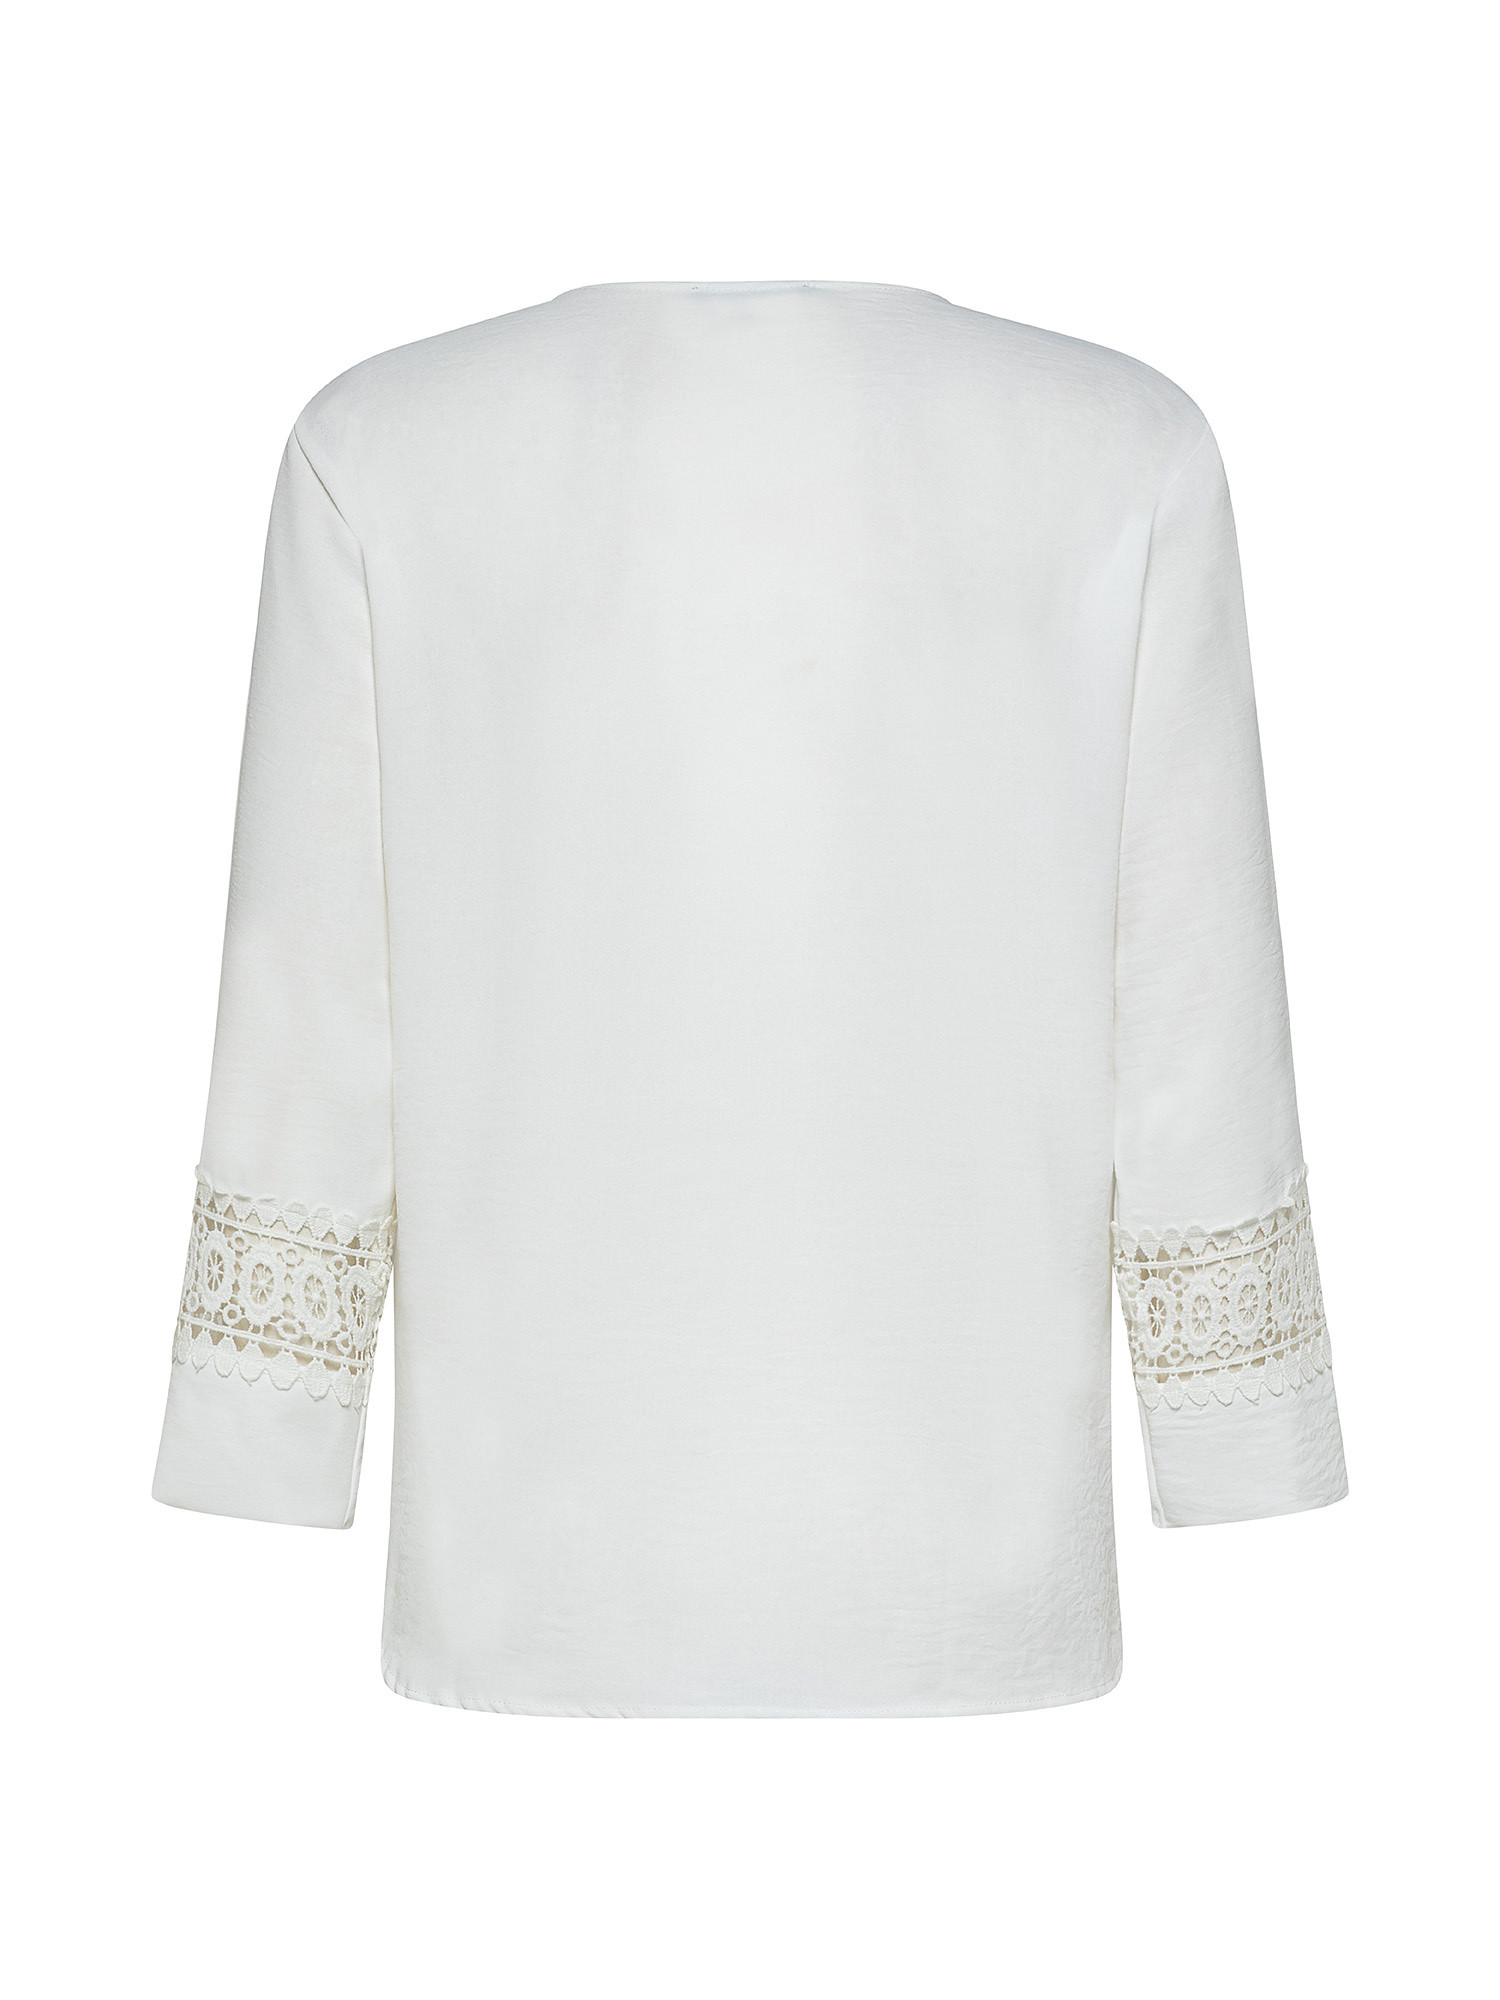 Blouse with crease, White, large image number 1